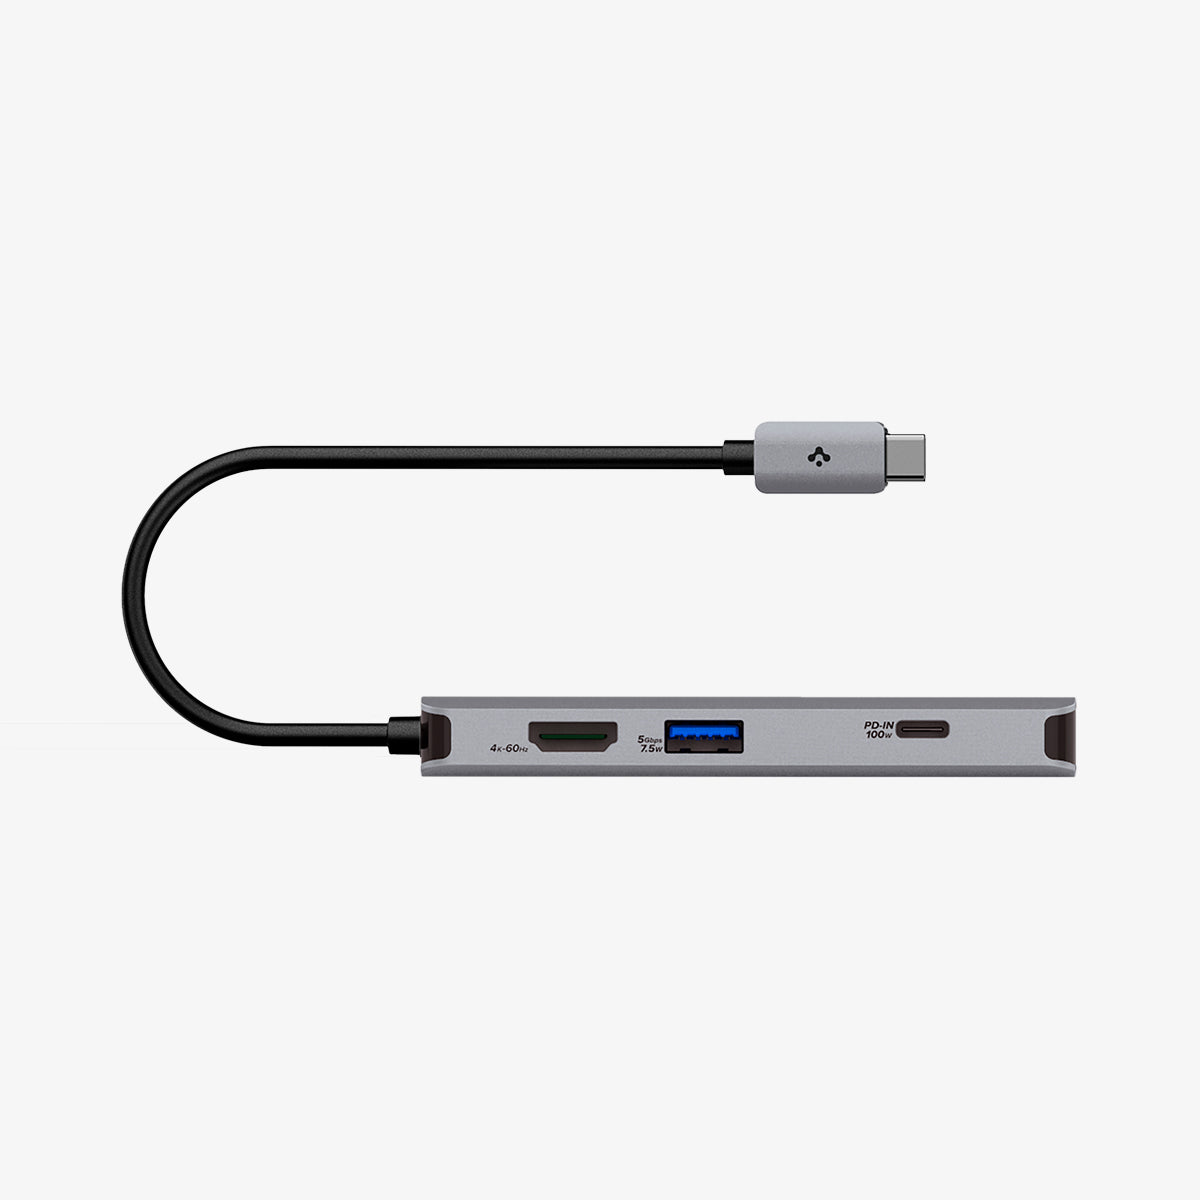 ACA06141 - ArcDock Multi Hub 8-in-1 PD2303 in Space Gray showing the side with a USB 3.0, HDMI and USB-C (PD-IN 100W) with a curved cable wire attached